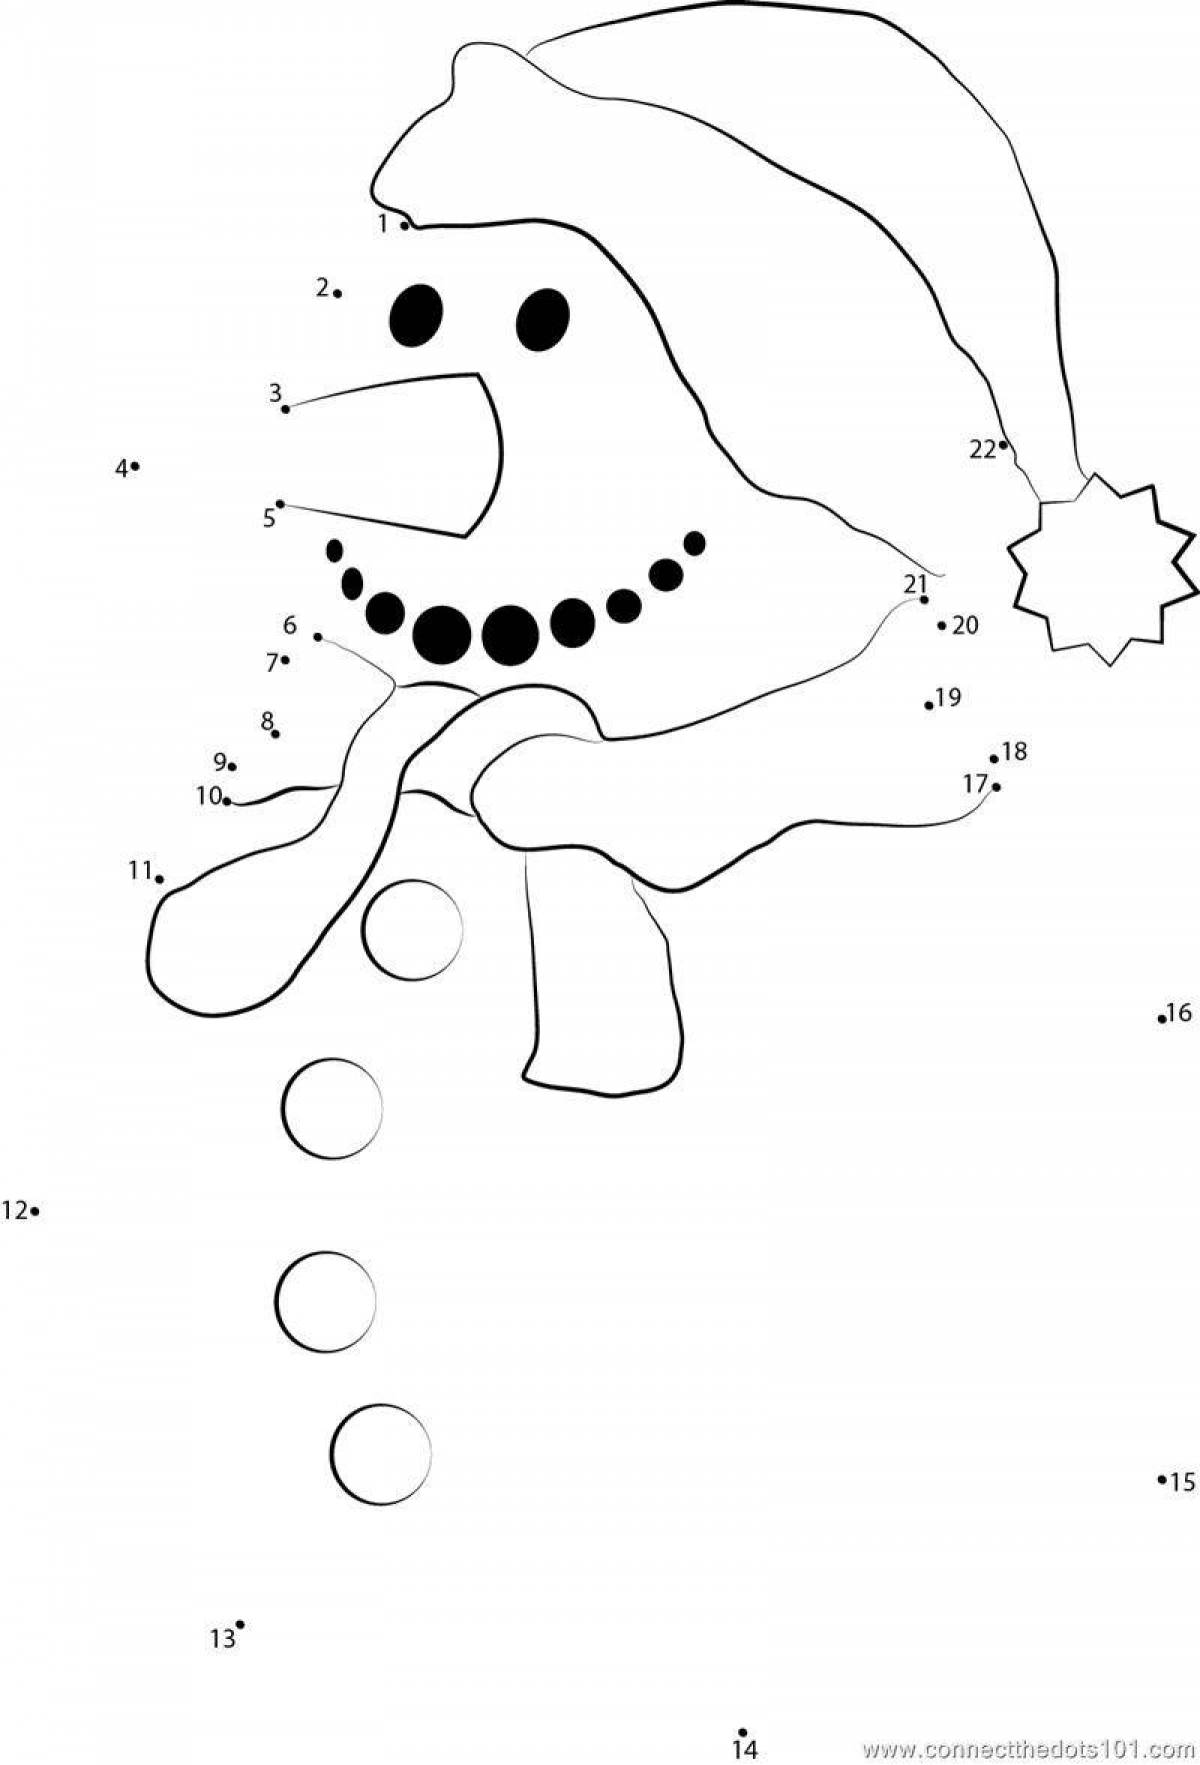 Snowman coloring page with bright dots